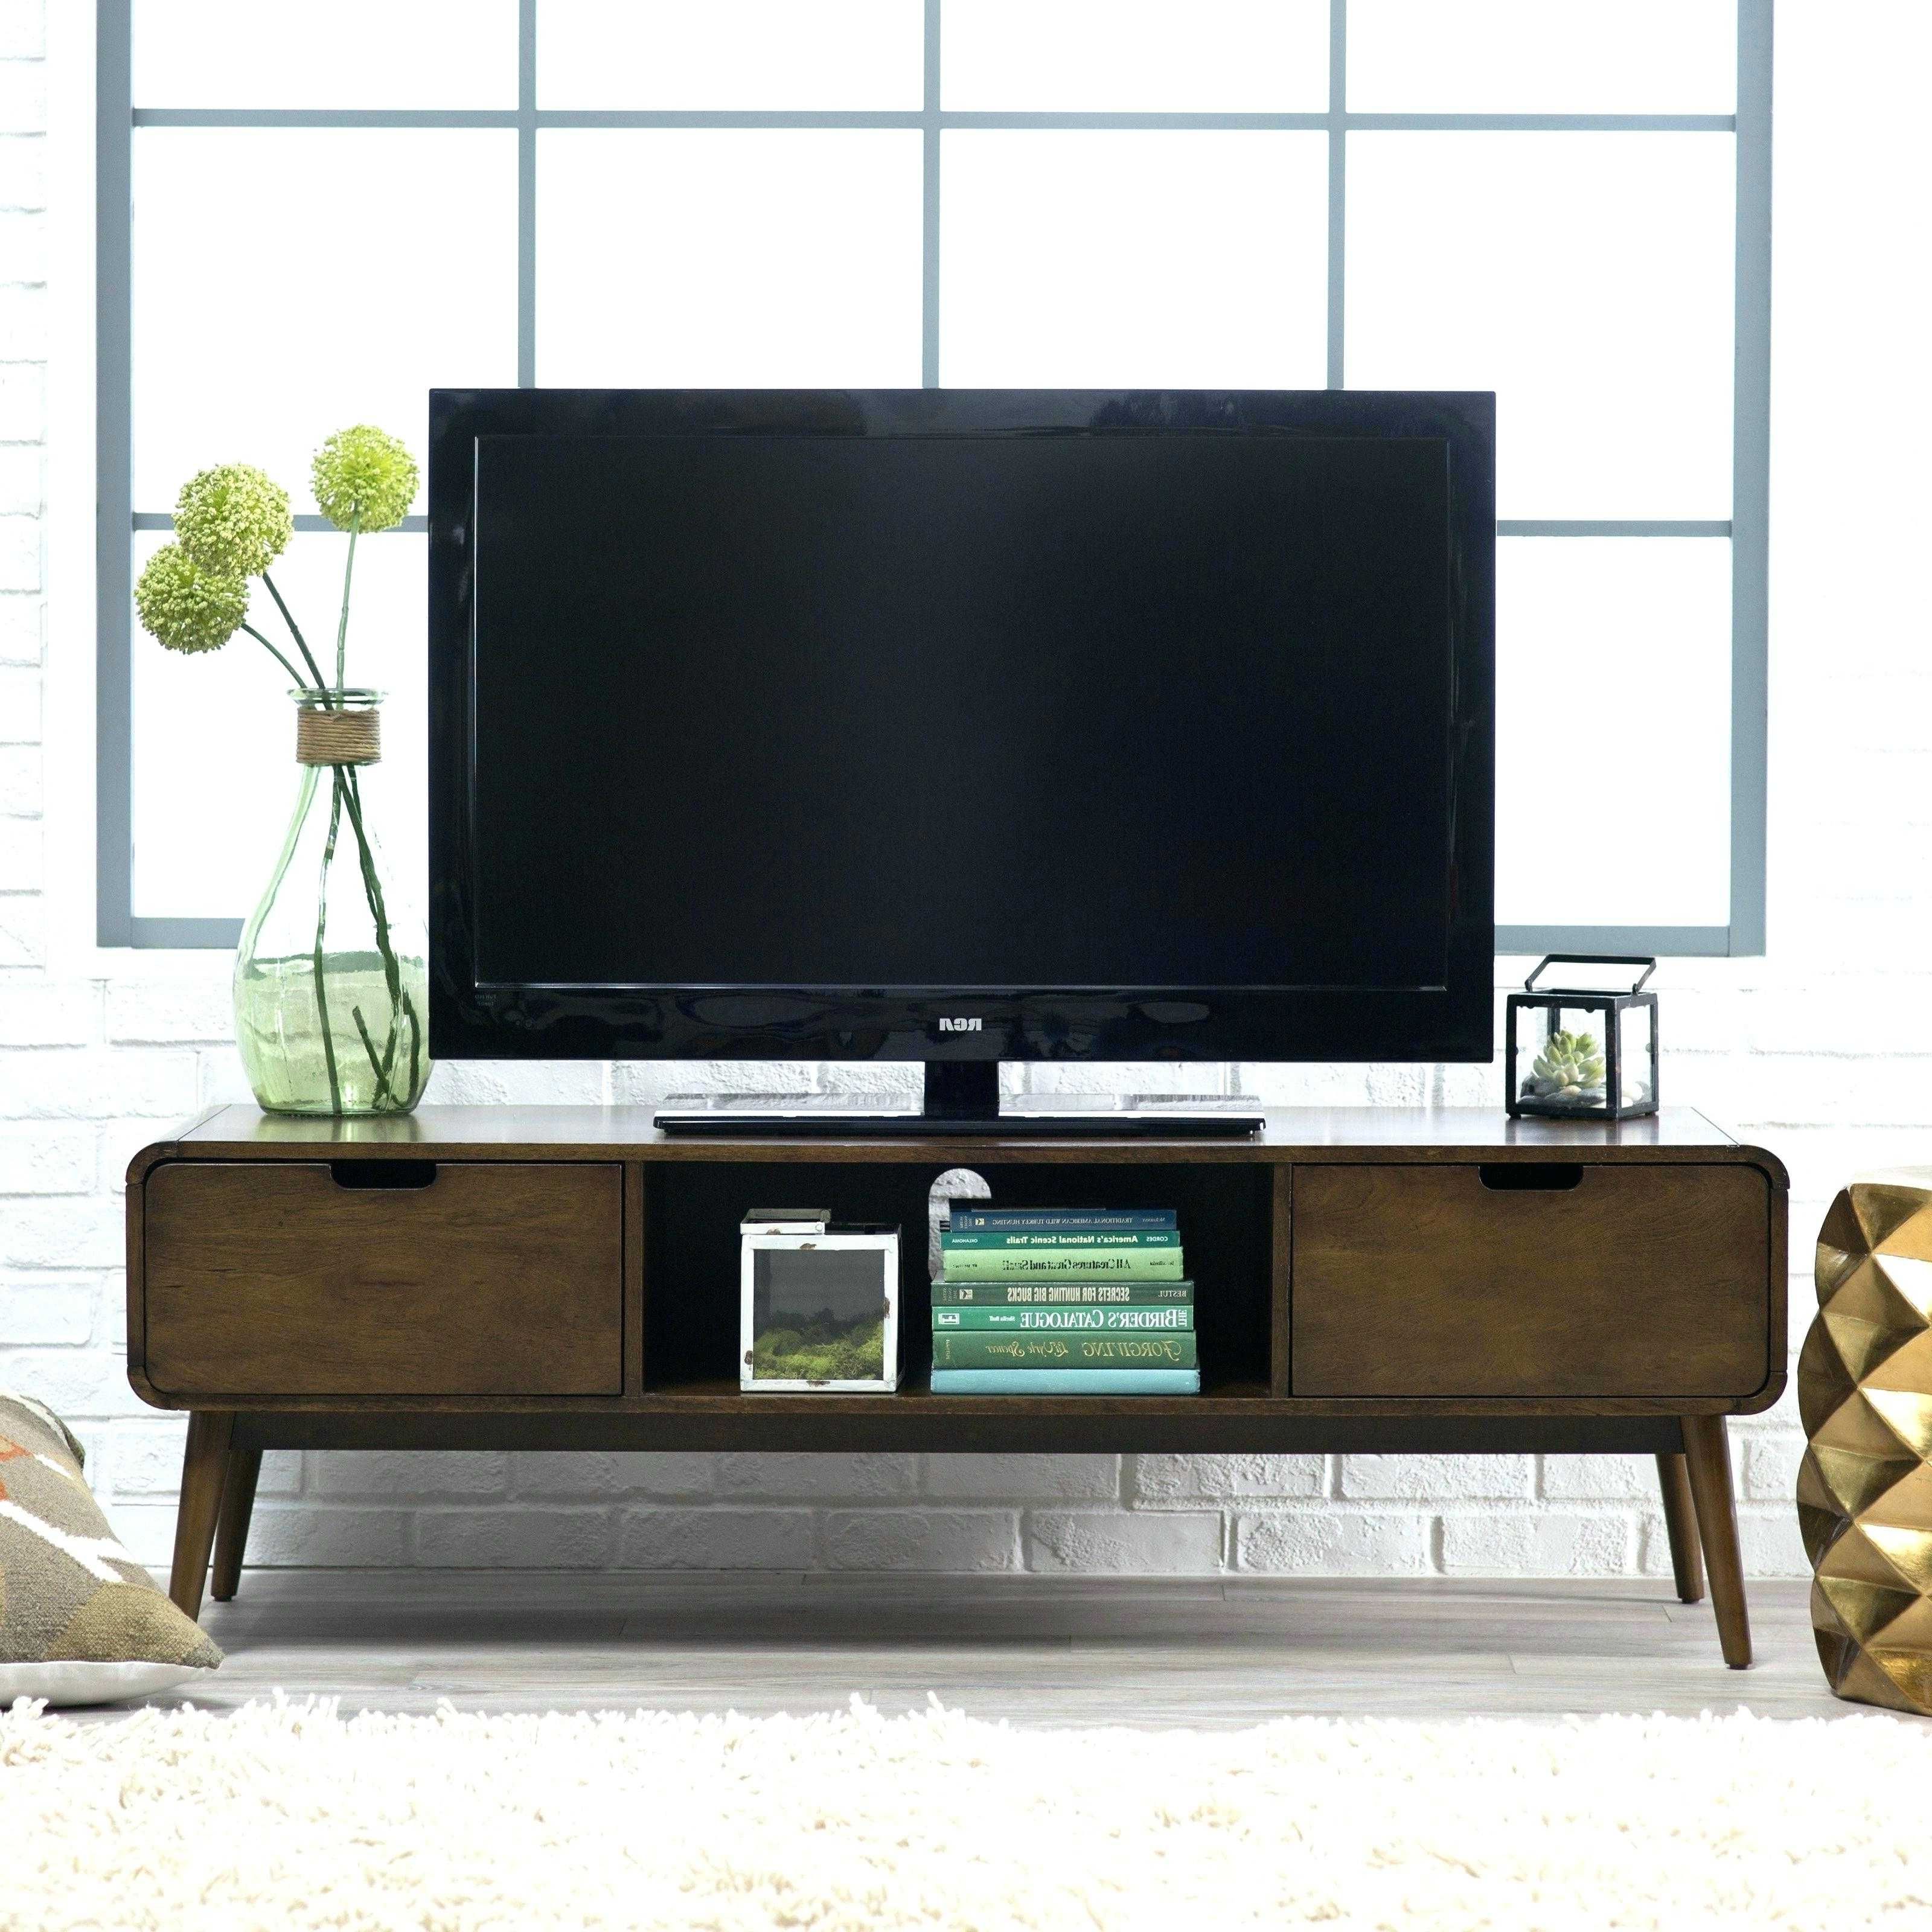 Well Known Television Cabinets Tv Stands With Mount Small For Bedroom Tall Ikea Regarding Small Tv Cabinets (View 4 of 20)